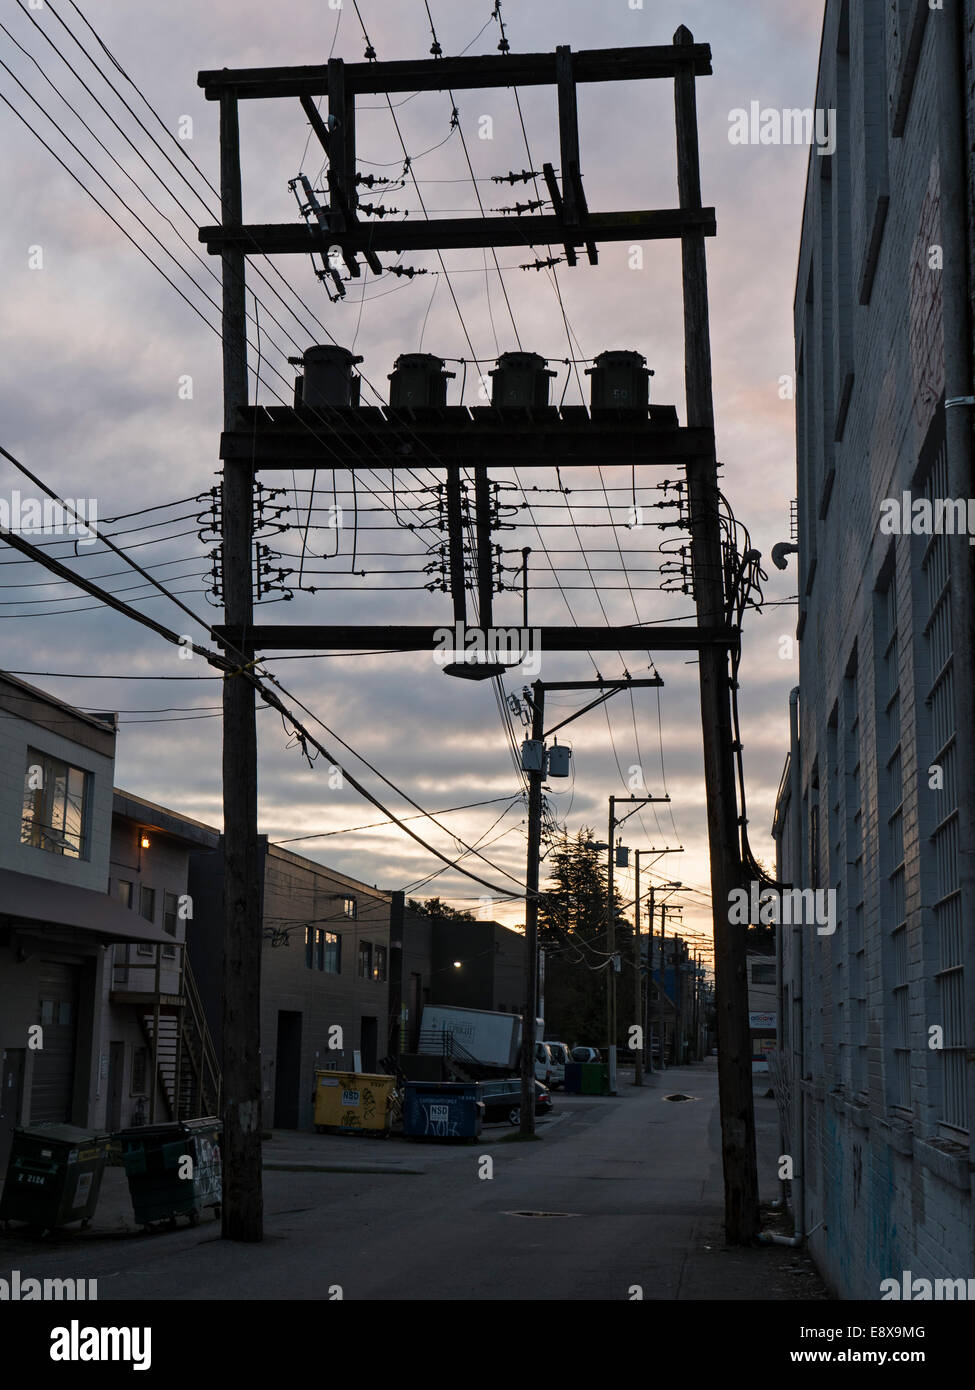 Silhouetted power poles and wires, part of a city's infrastructure, Vancouver, B.C., Canada. Stock Photo